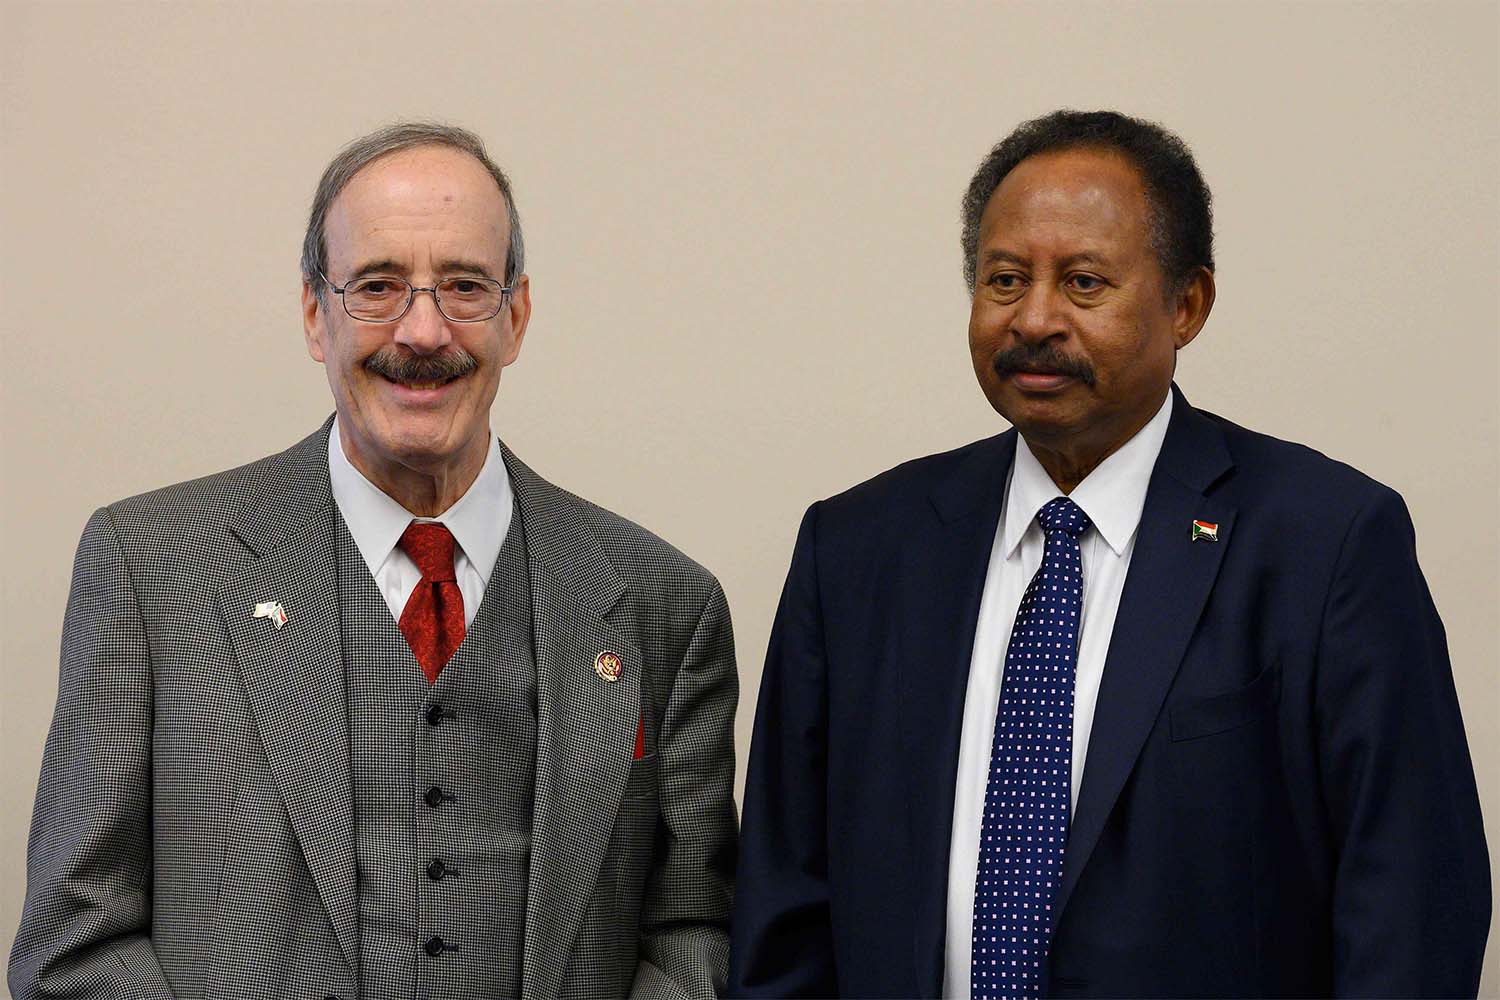 Sudanese PM Abdalla Hamdok (R) meets with House Foreign Affairs Committee Chairman Eliot Engel (L)